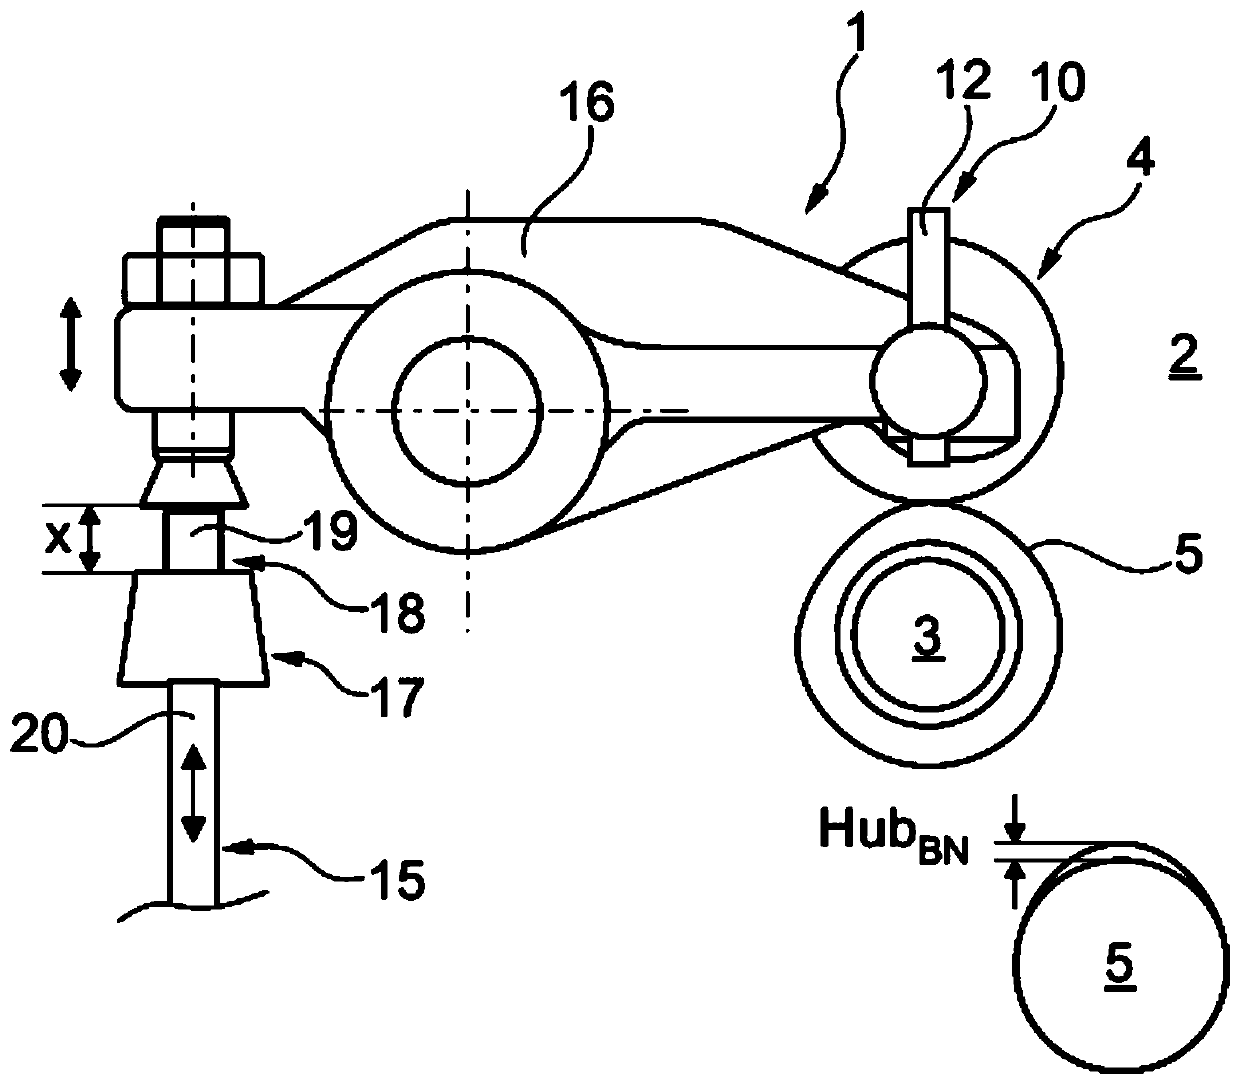 Valve drive for an internal combustion engine